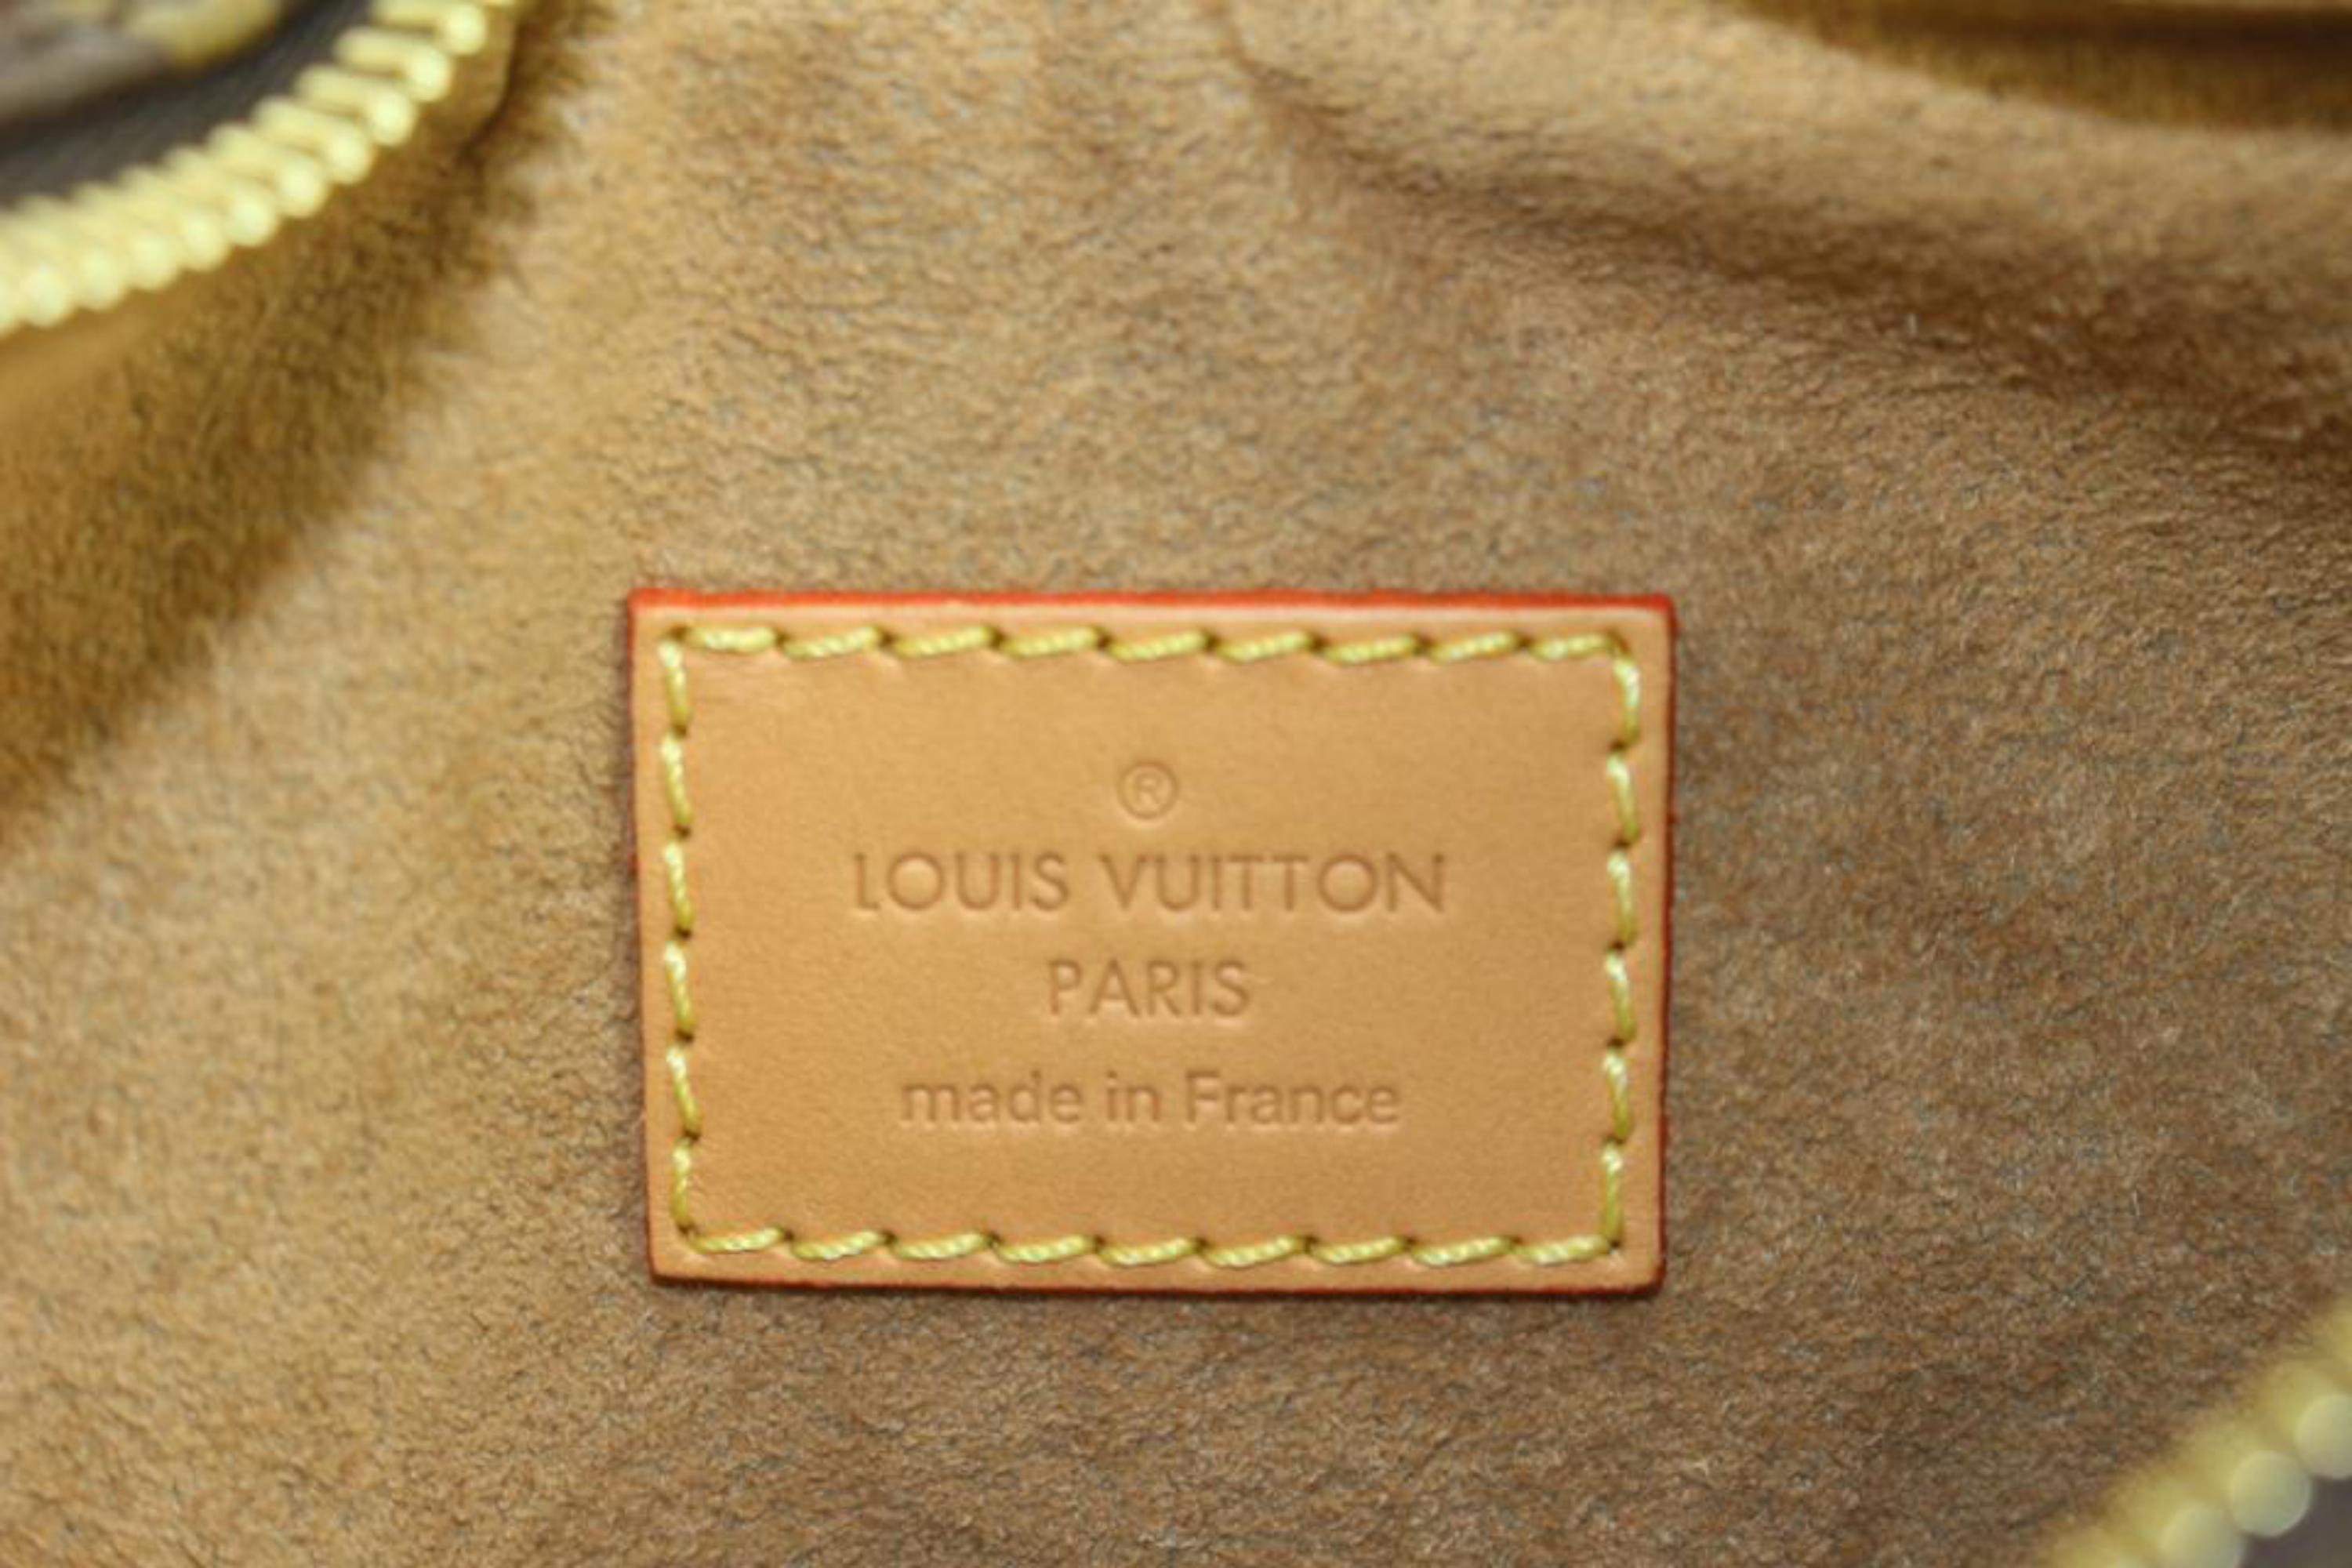 Louis Vuitton Rare Monogram Loop Chain Hobo Crossbody Croissant Bag 1118lv34 In New Condition For Sale In Dix hills, NY